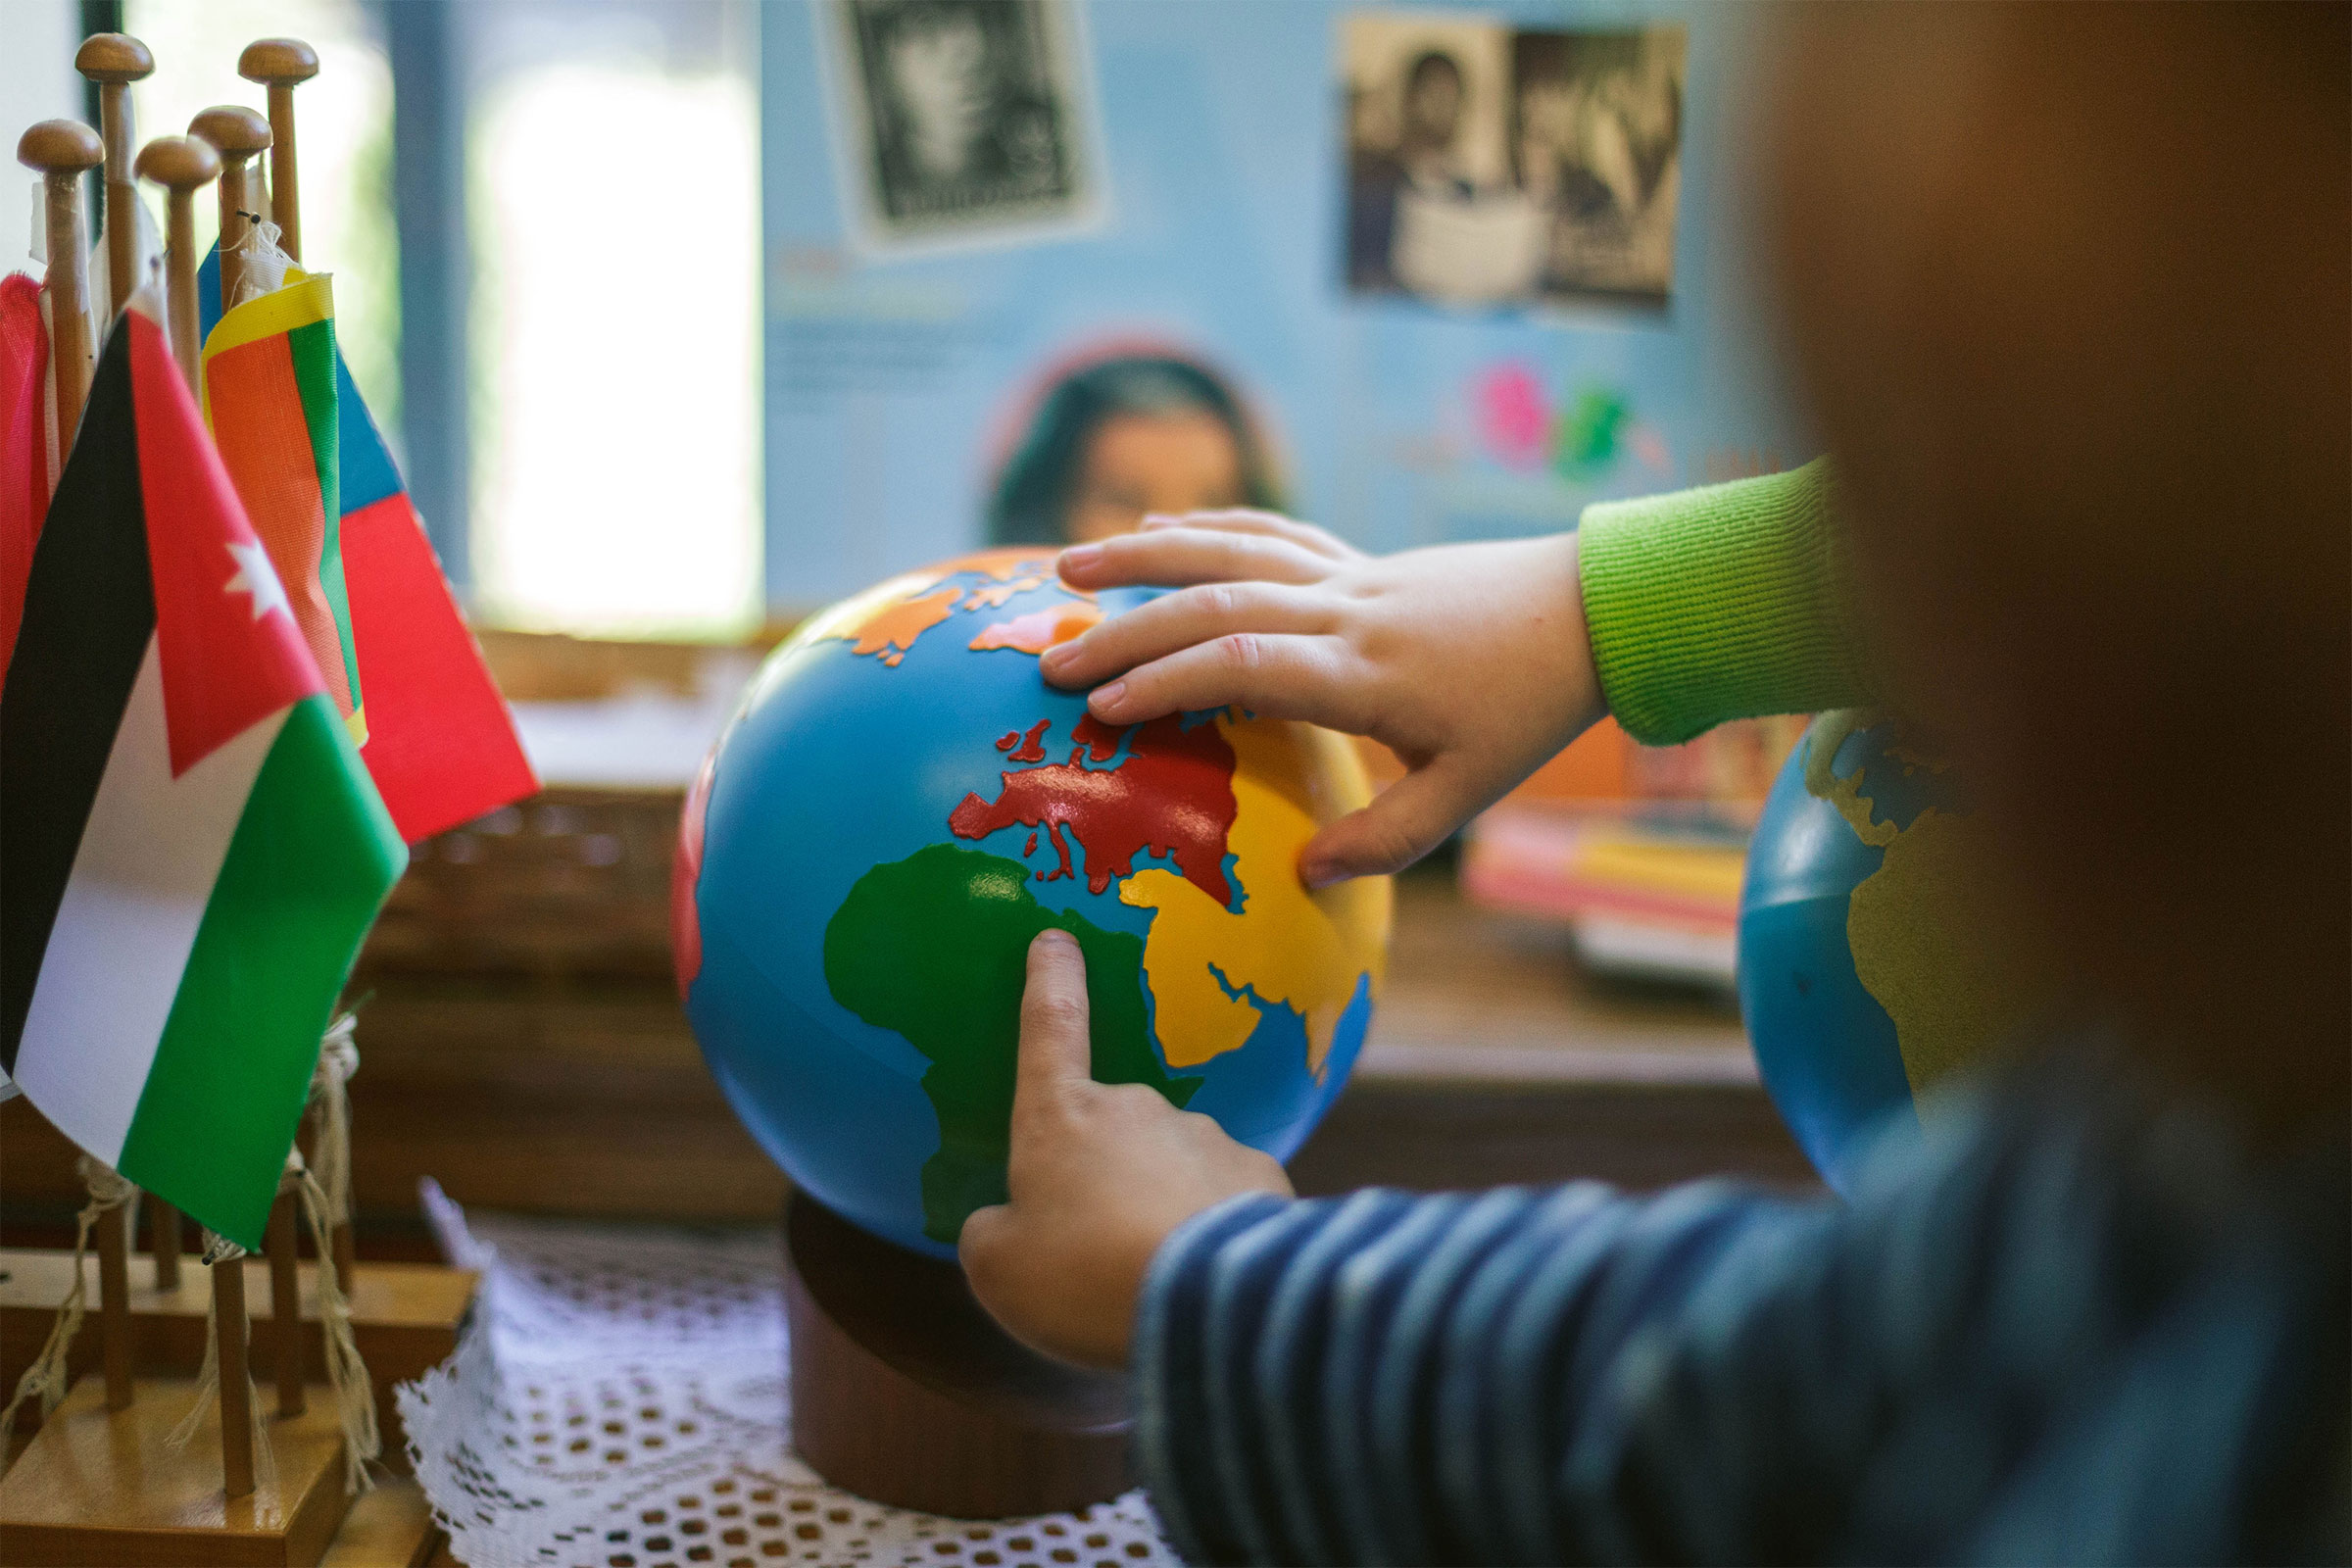 Children's hands pointing to globe of the world next to flags in Montessori classroom